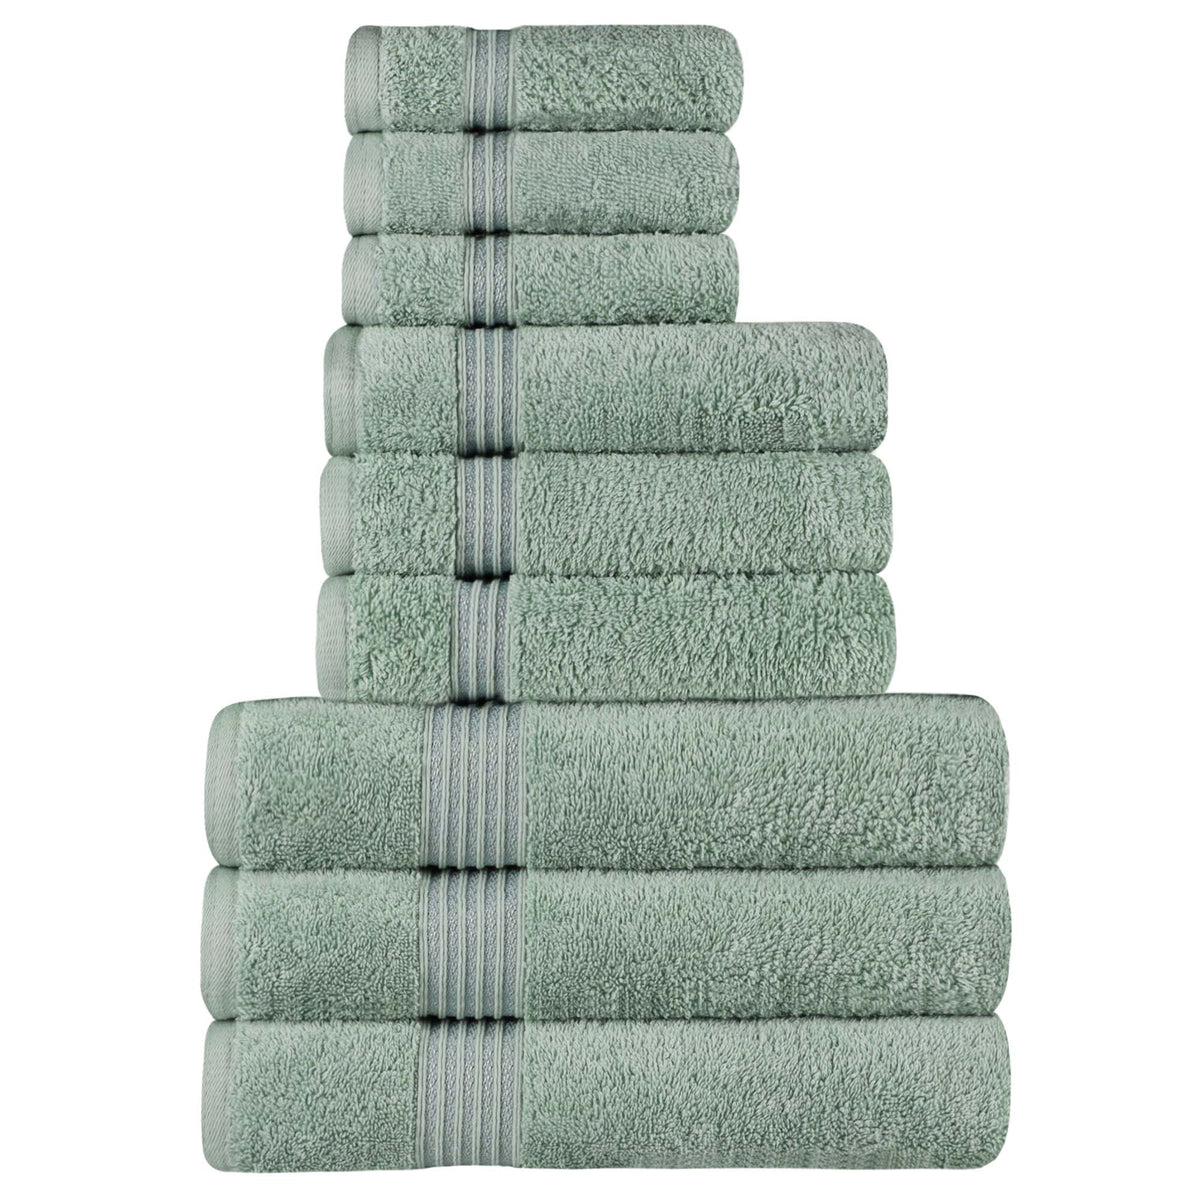 Egyptian Cotton Highly Absorbent Solid 9 Piece Ultra Soft Towel Set - Sage